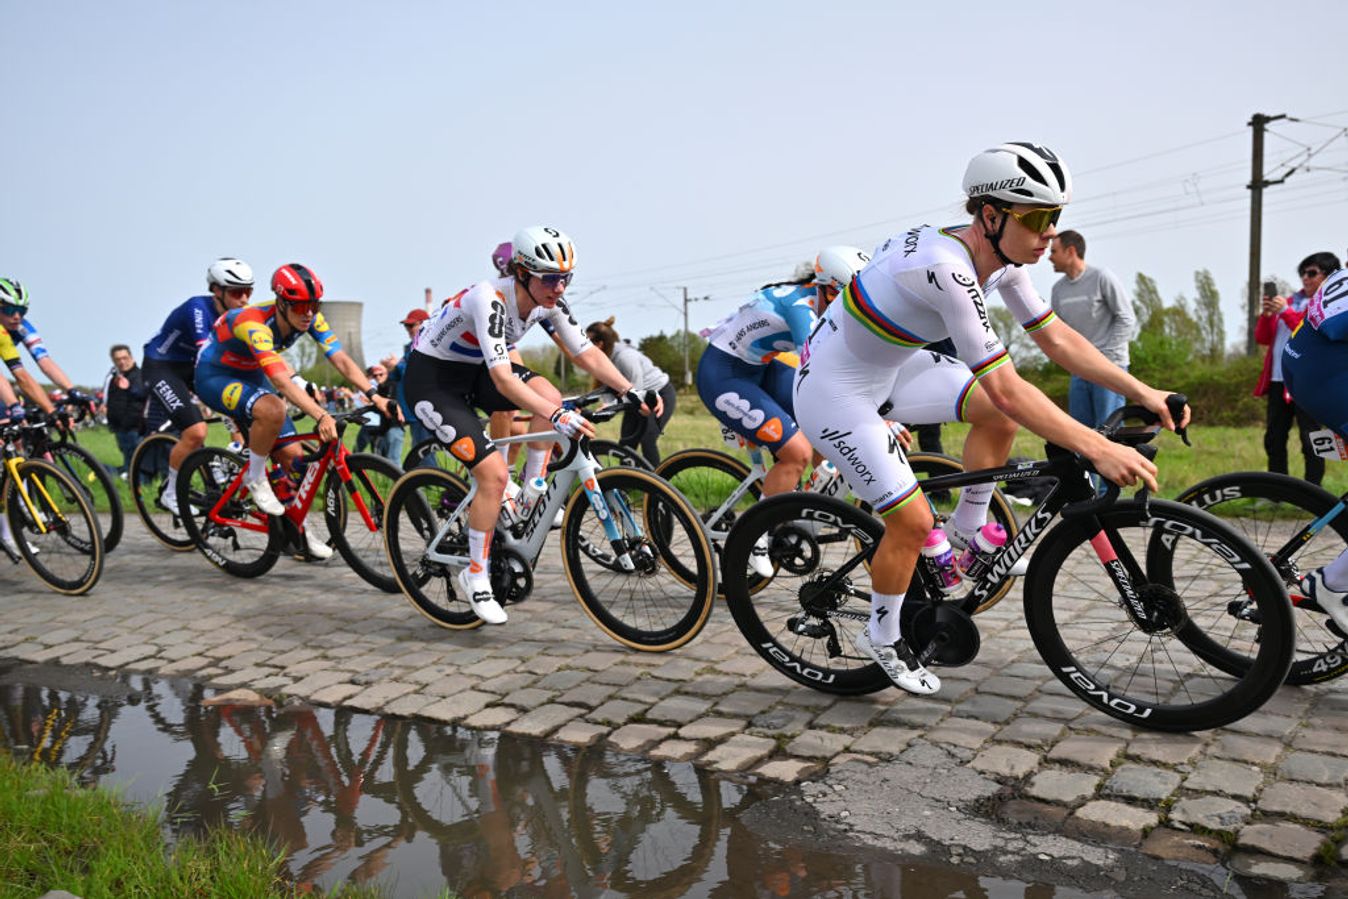 The leaders rode a hard pace over the cobbles throughout the race